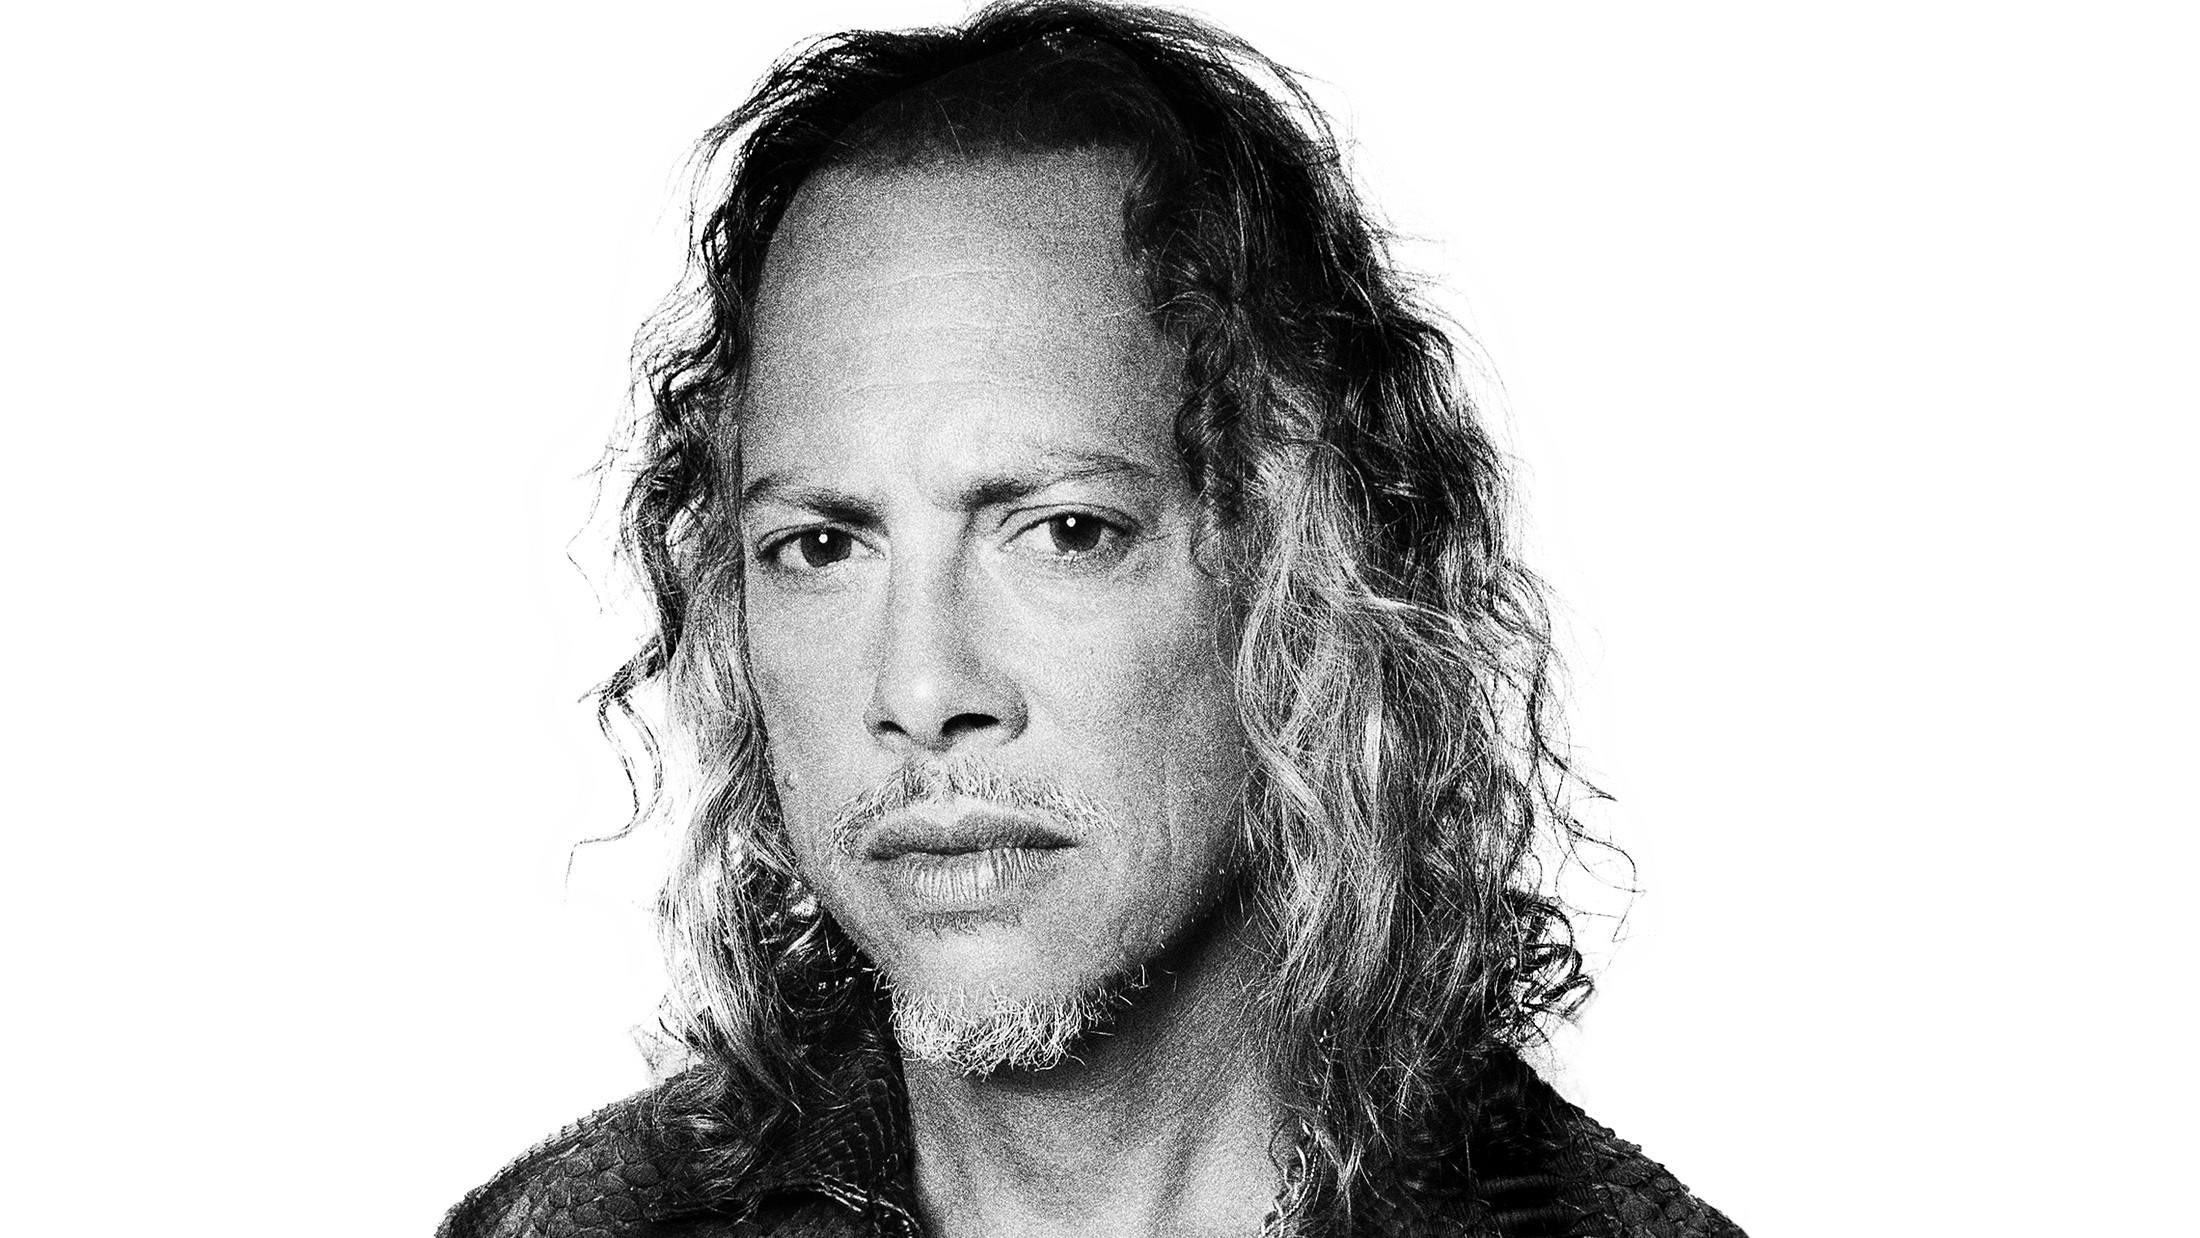 Watch Metallica's Kirk Hammett Slip Over On Stage... And Keep Playing!